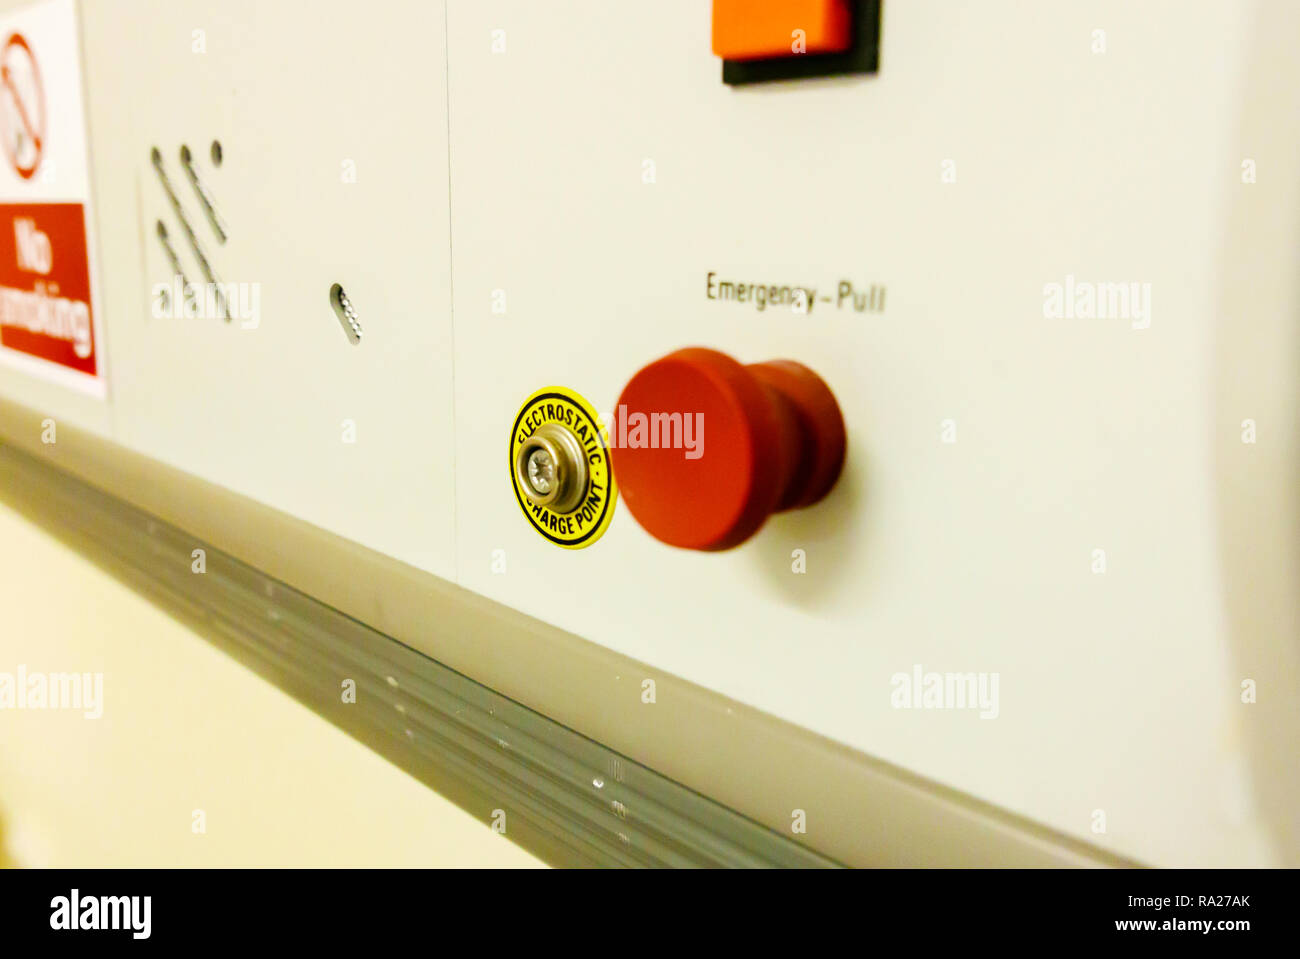 Bed head unit in a hospital ward showing an emergency red pull call bell and an electrostatic discharge point. Stock Photo